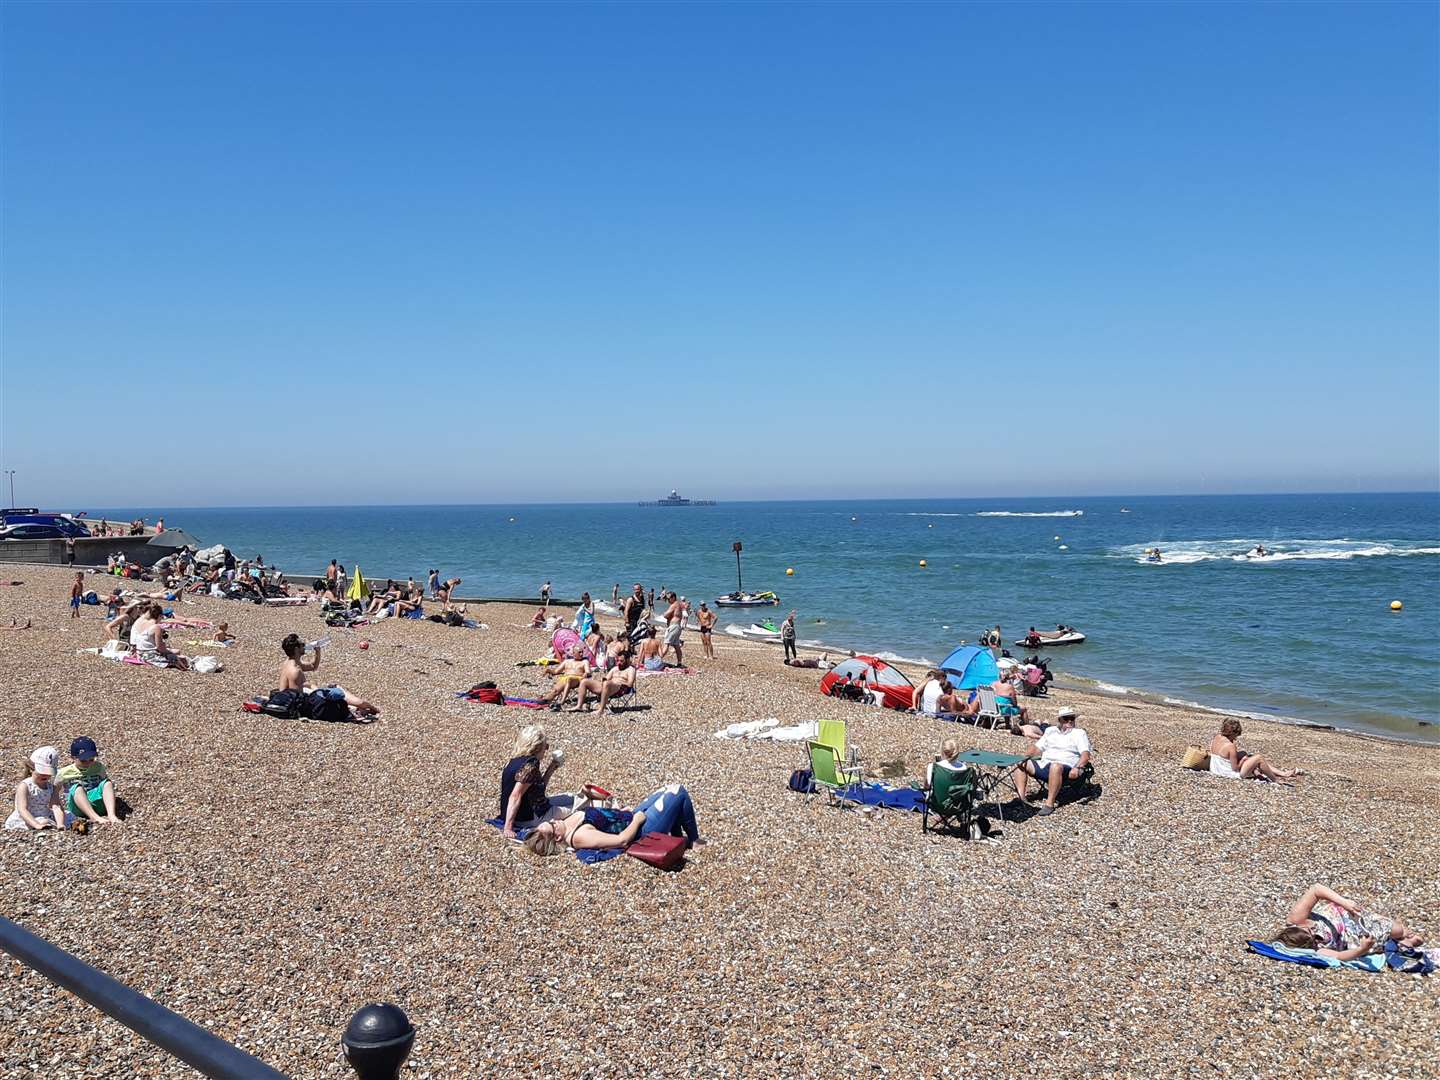 The scene on Herne Bay seafront today